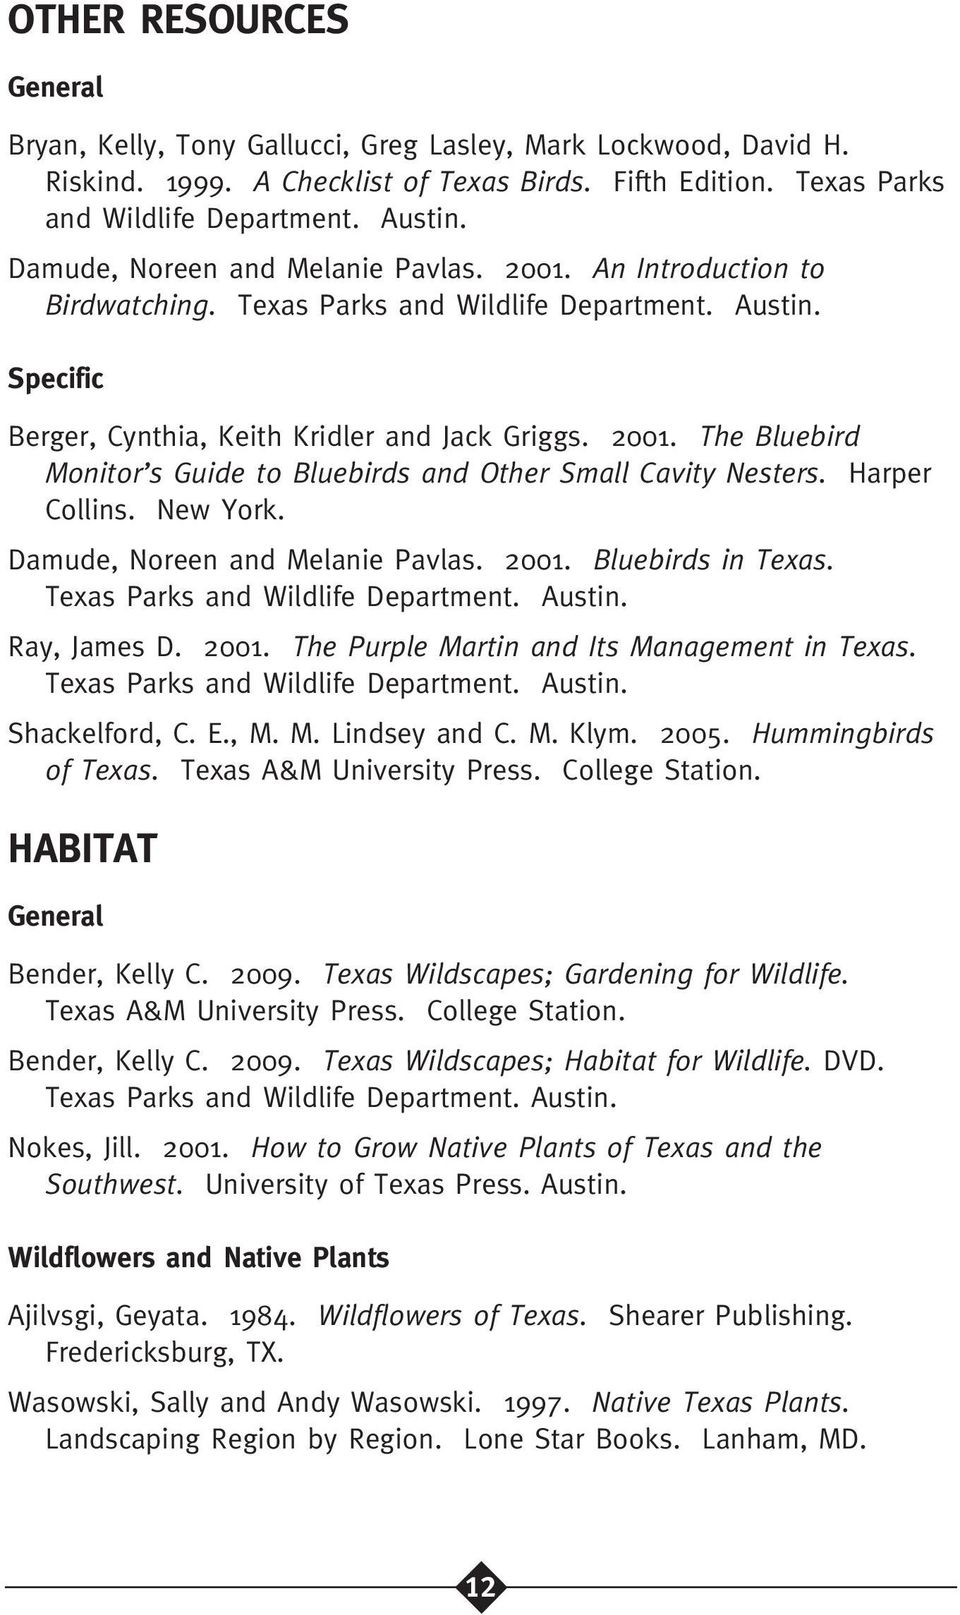 Harper Collins. New York. Damude, Noreen and Melanie Pavlas. 2001. Bluebirds in Texas. Texas Parks and Wildlife Department. Austin. Ray, James D. 2001. The Purple Martin and Its Management in Texas.